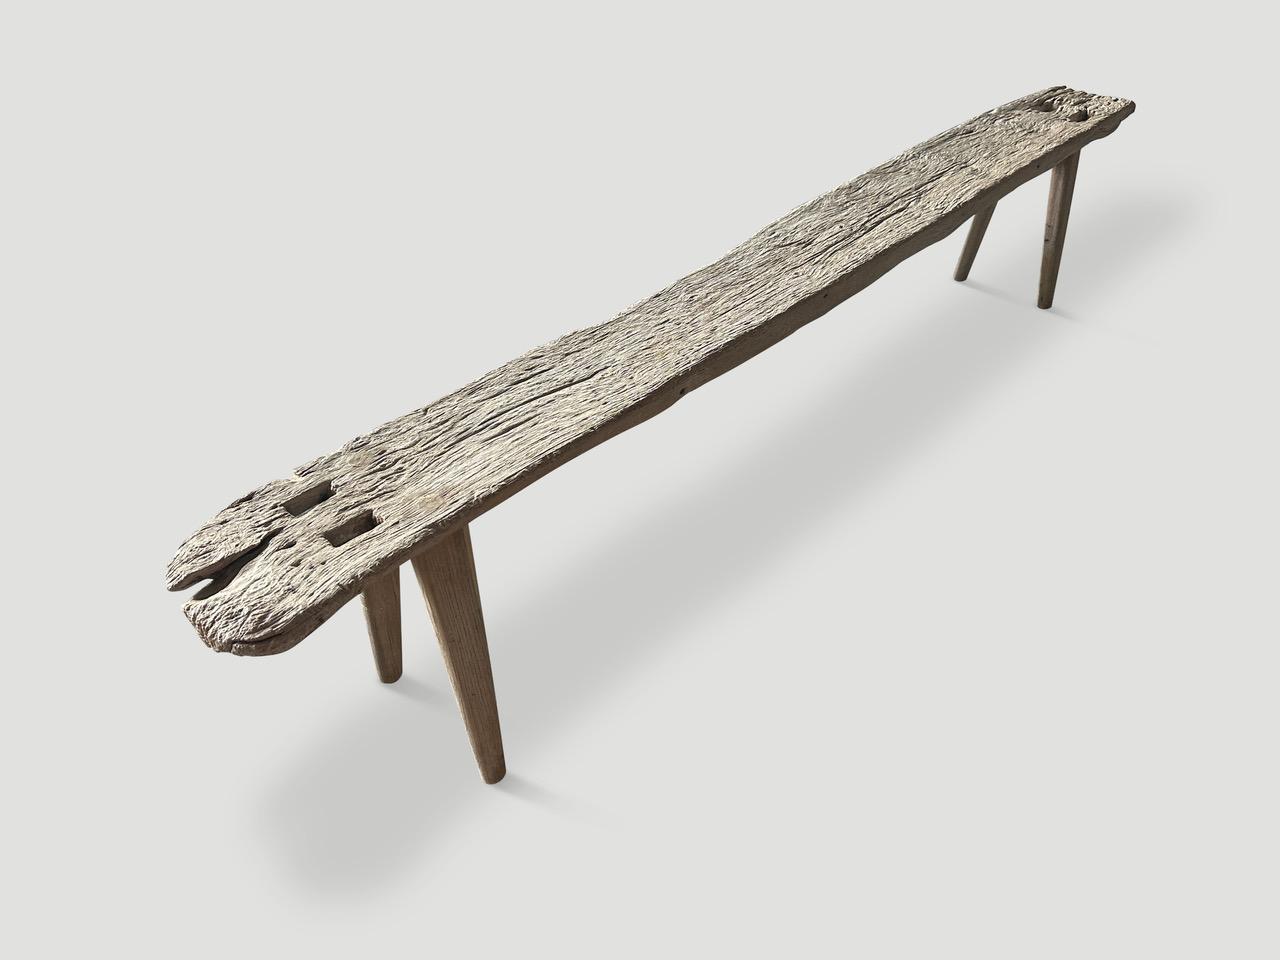 Andrianna Shamaris St. Barts Teak Wood Long Bench In Excellent Condition For Sale In New York, NY